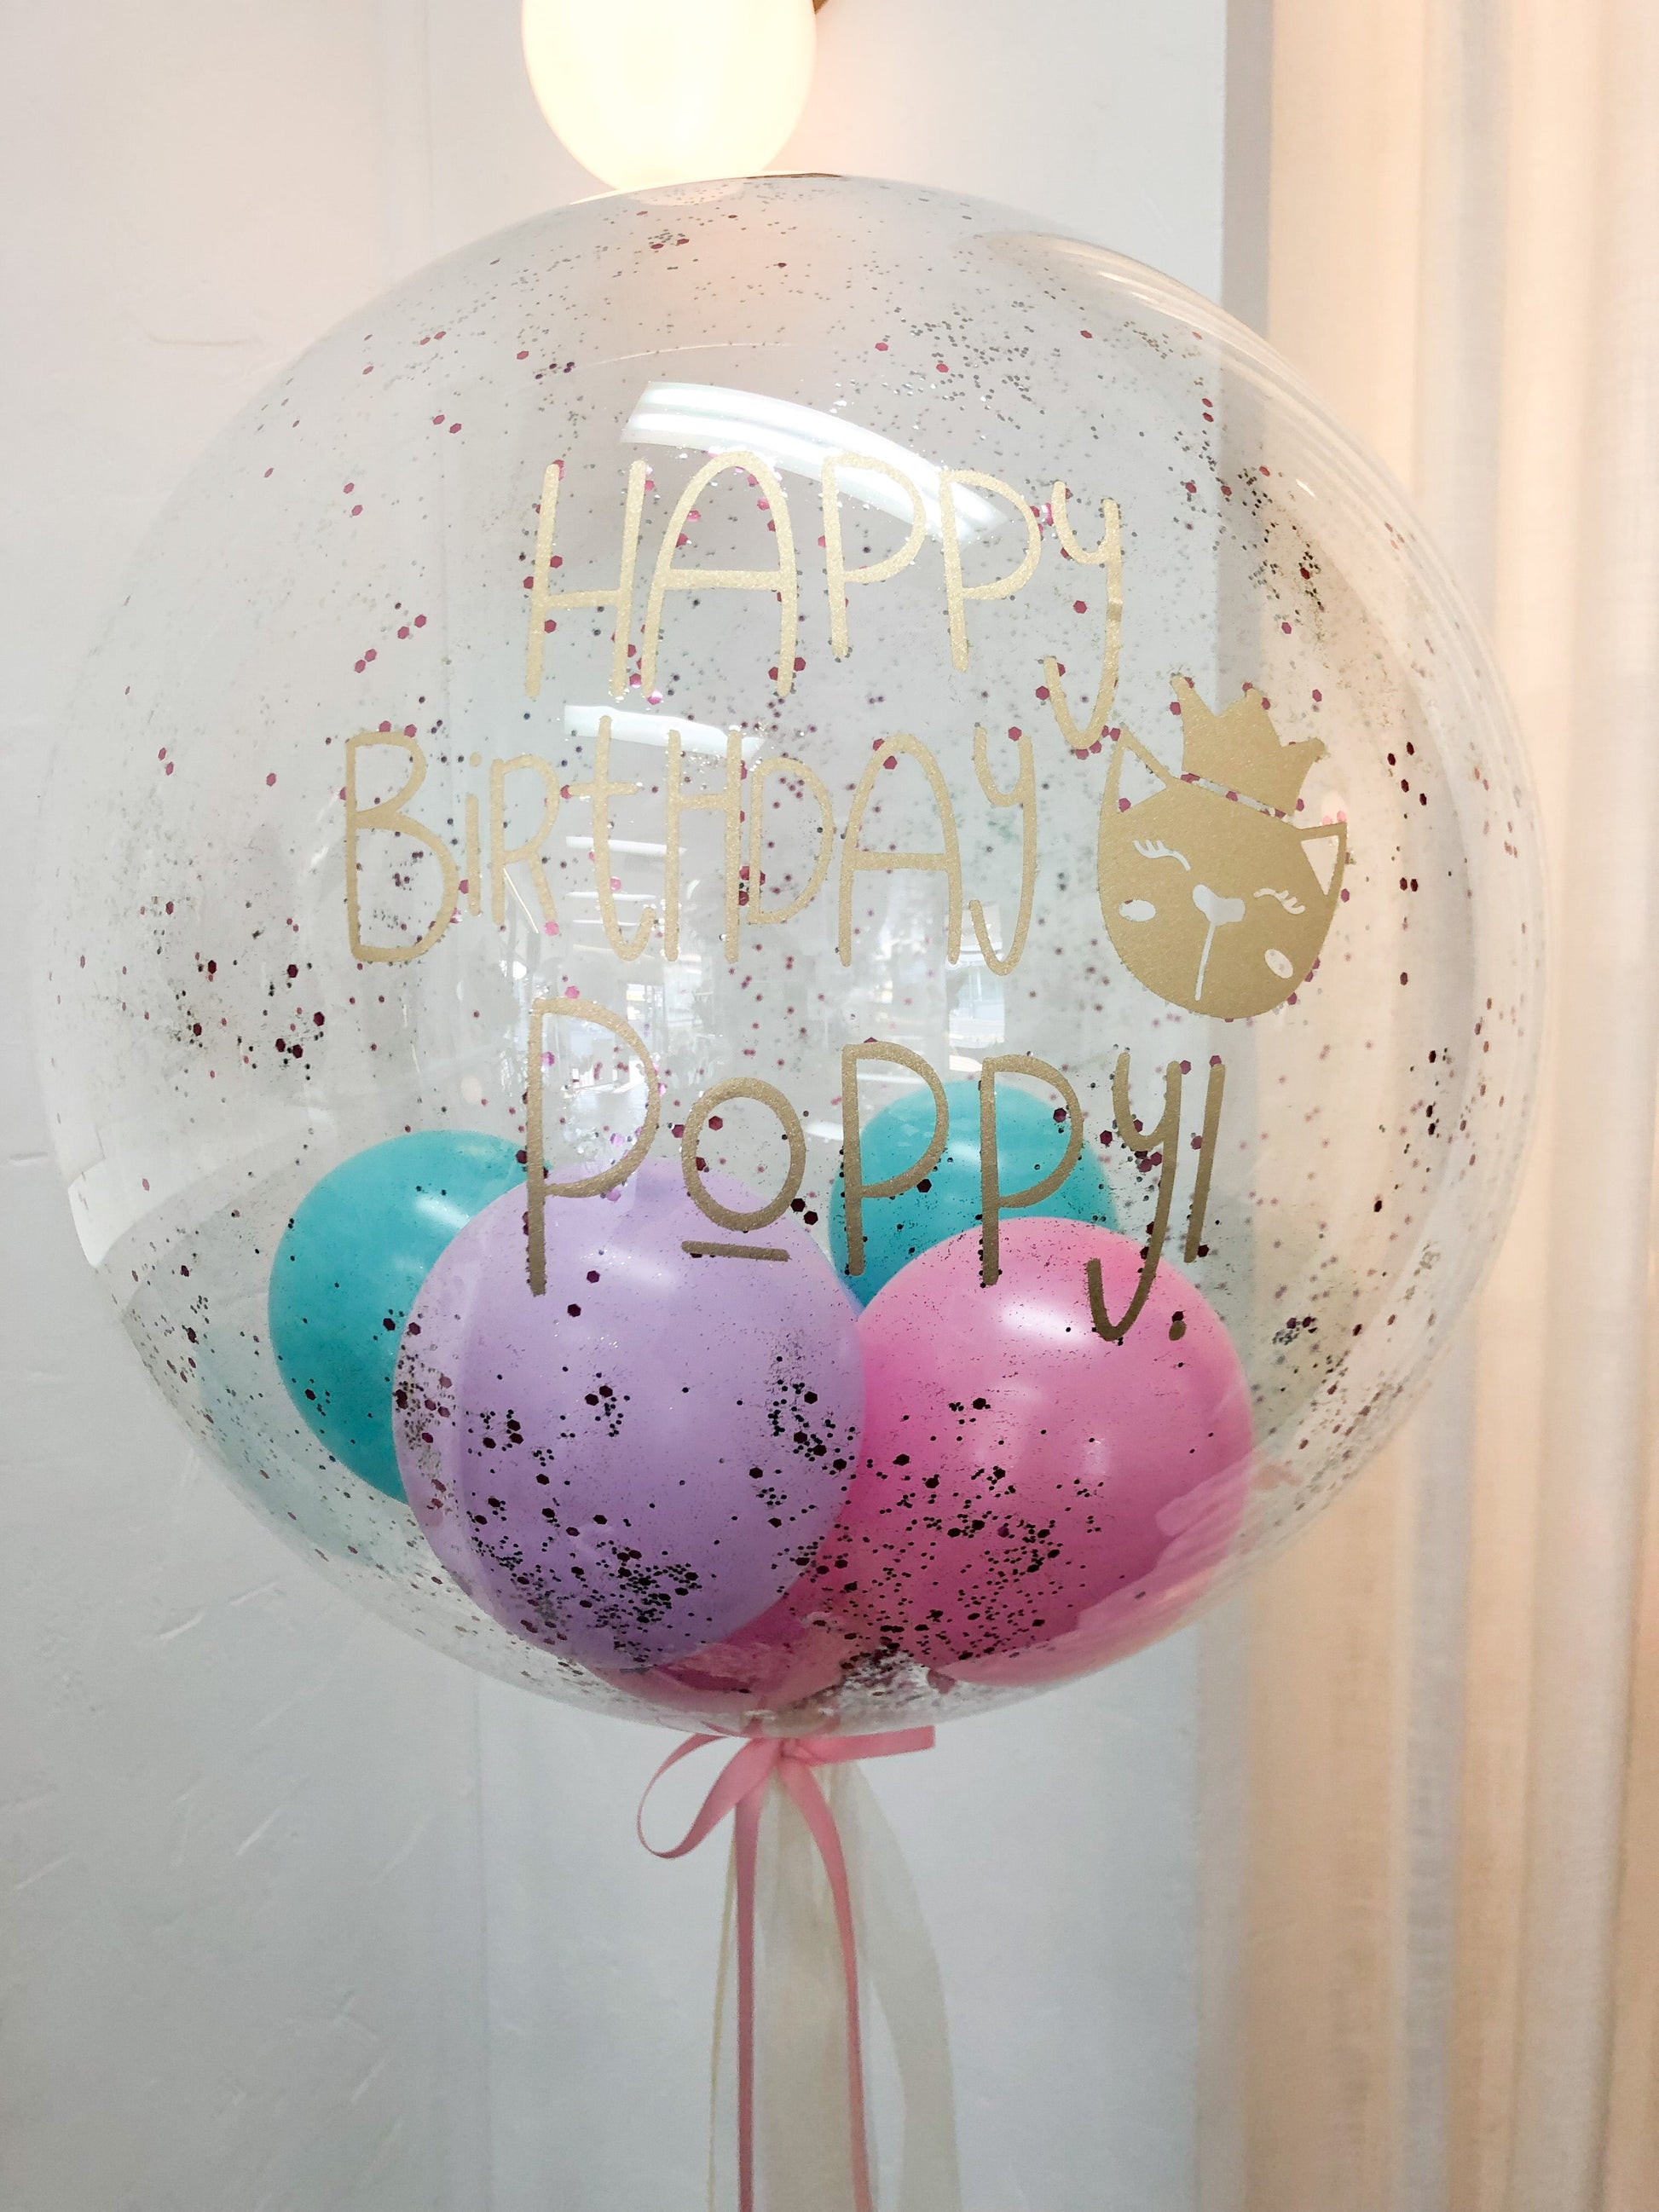 Colourful and magical Helium Birthday Bubble Balloon for Kids.  Customised birthday balloon with you boy or girl's name on it. Perfect for kids of all ages.